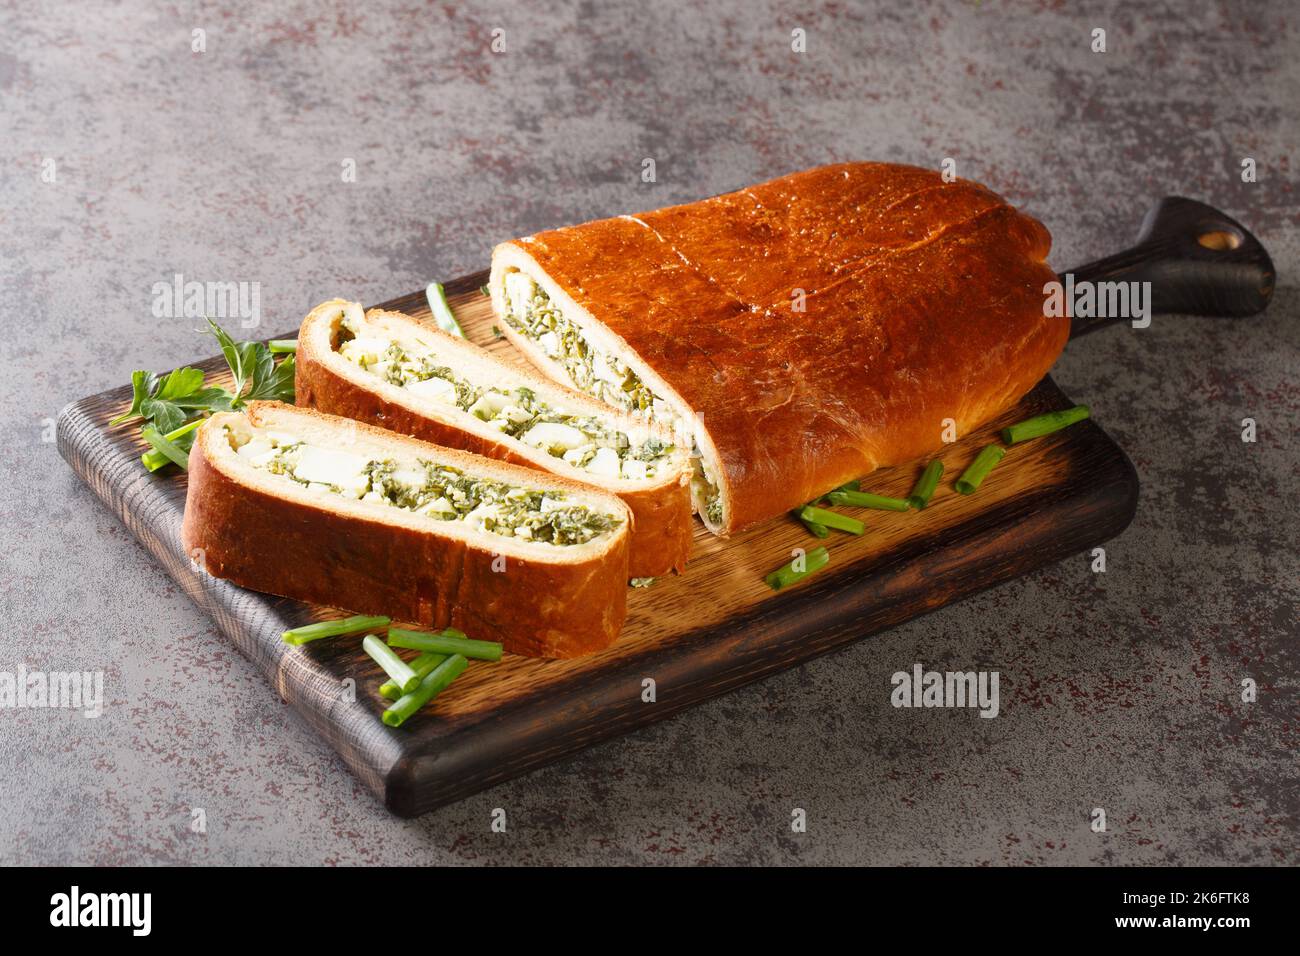 Yeast cake with filling fresh herbs with egg closeup on wooden board on the table. Horizontal Stock Photo